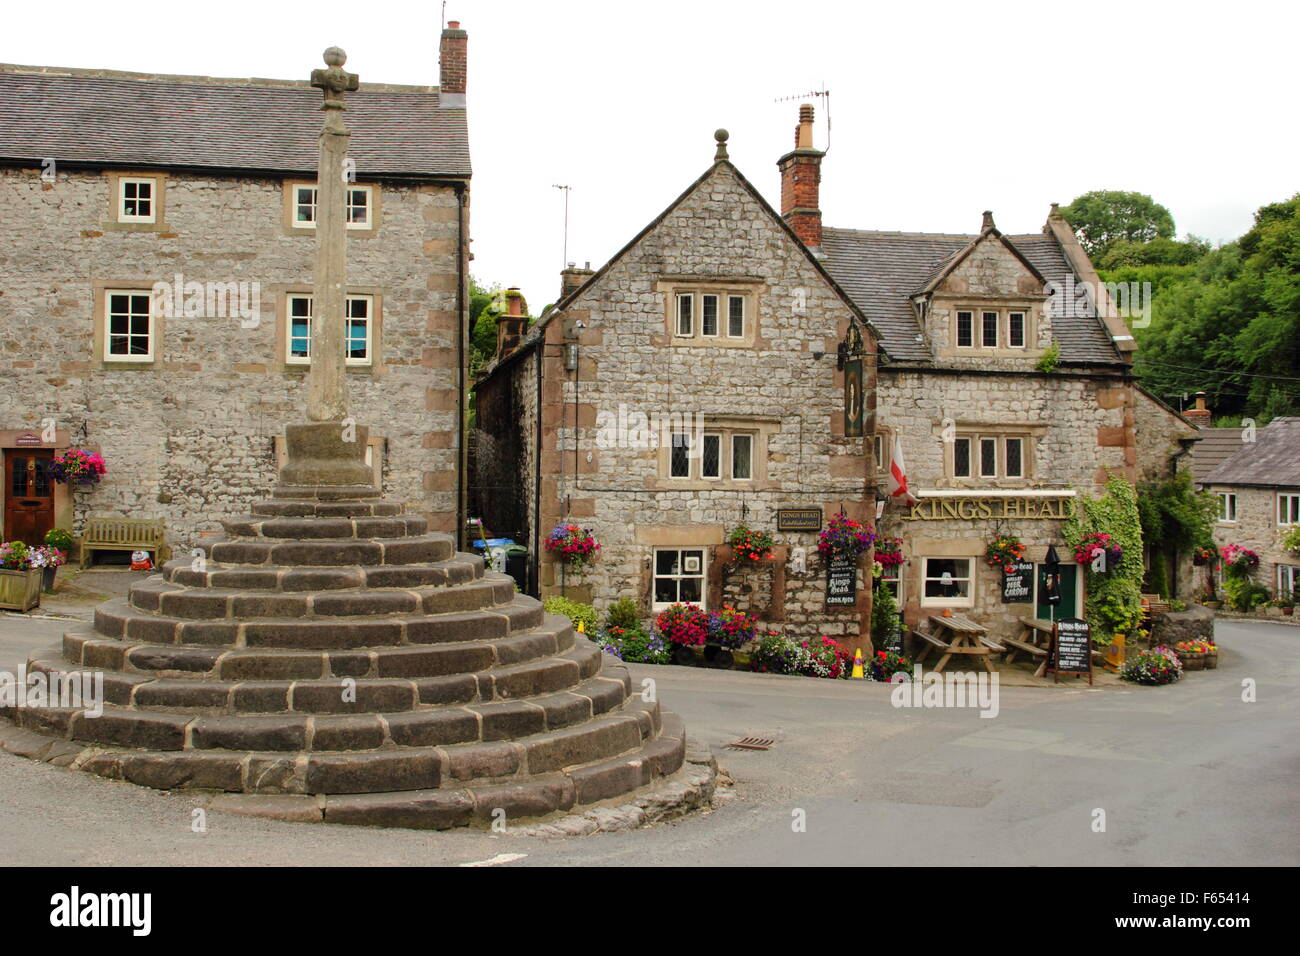 The market cross outside the King's Head public house in the centre of Bonsall village in the Derbyshire Dales England UK,summer Stock Photo